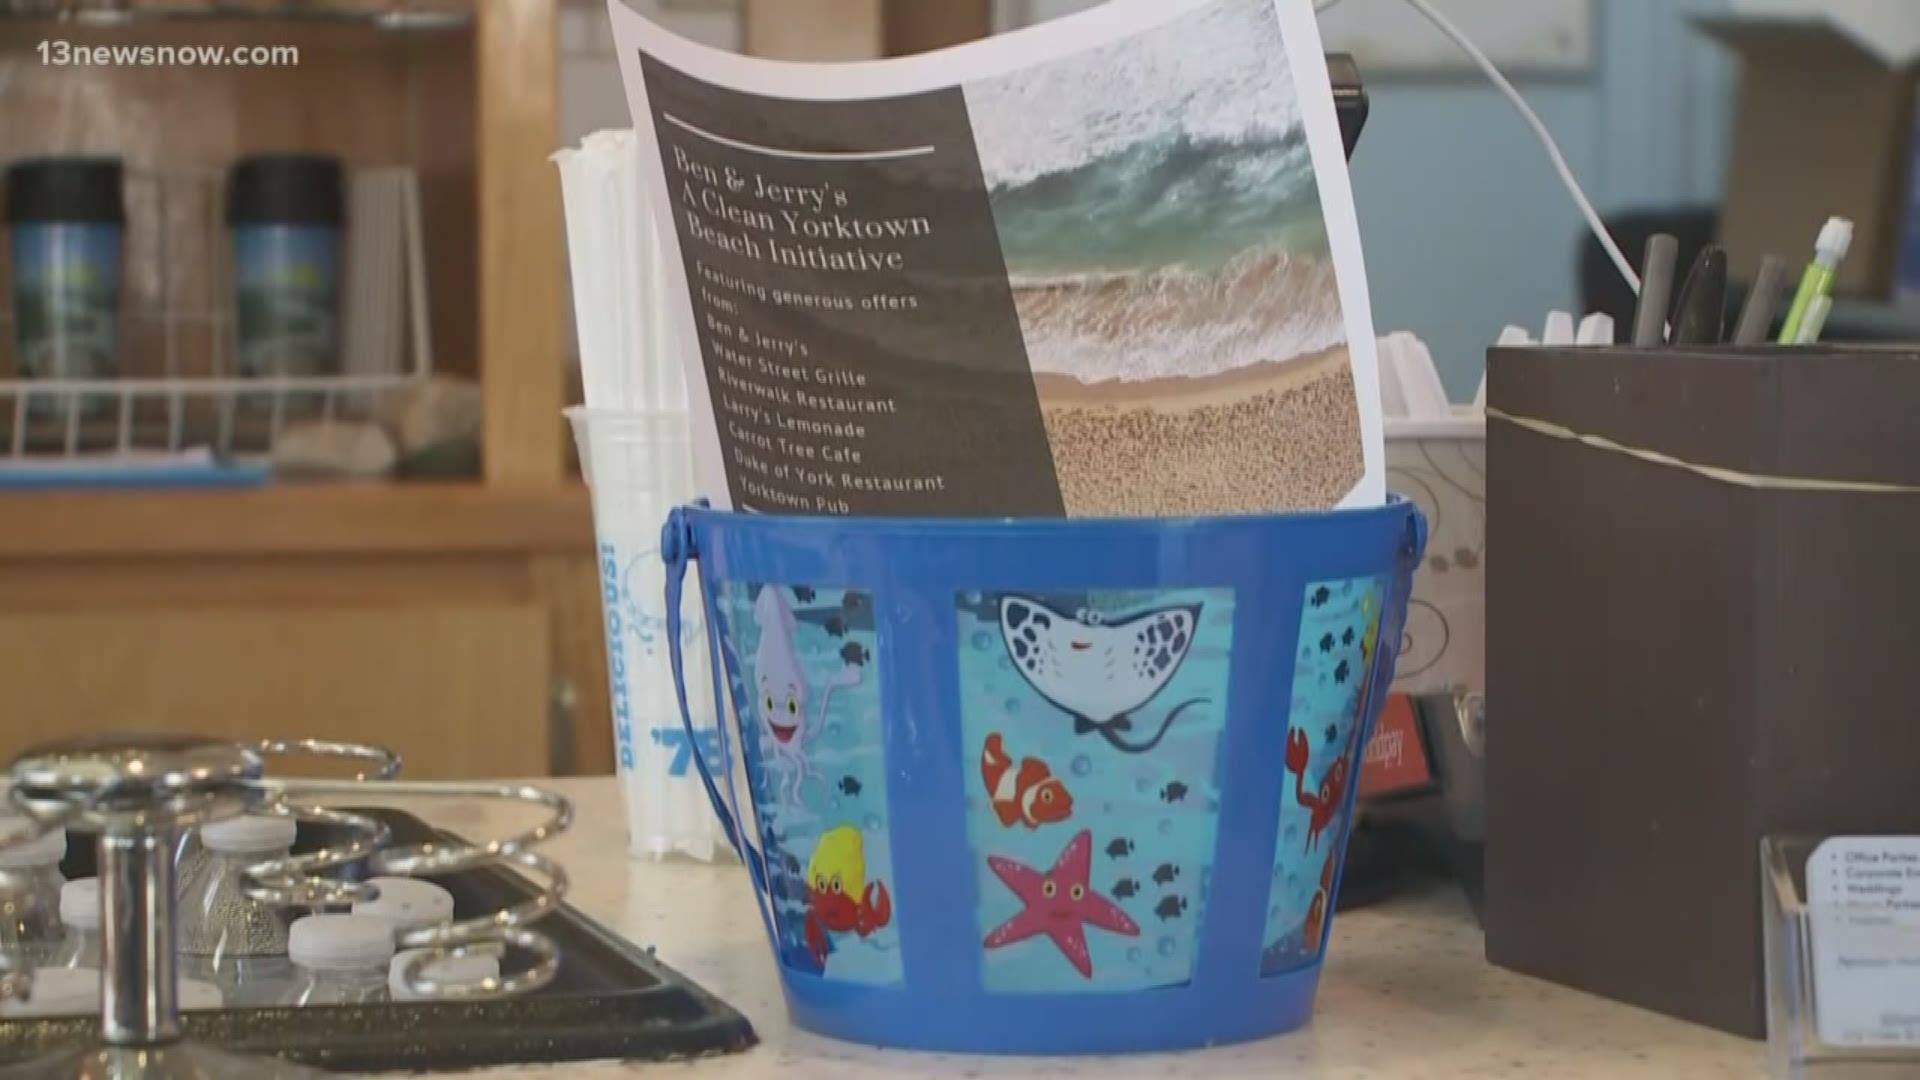 Businesses along the York County waterfront are giving neighbors an incentive to clean up the beaches.